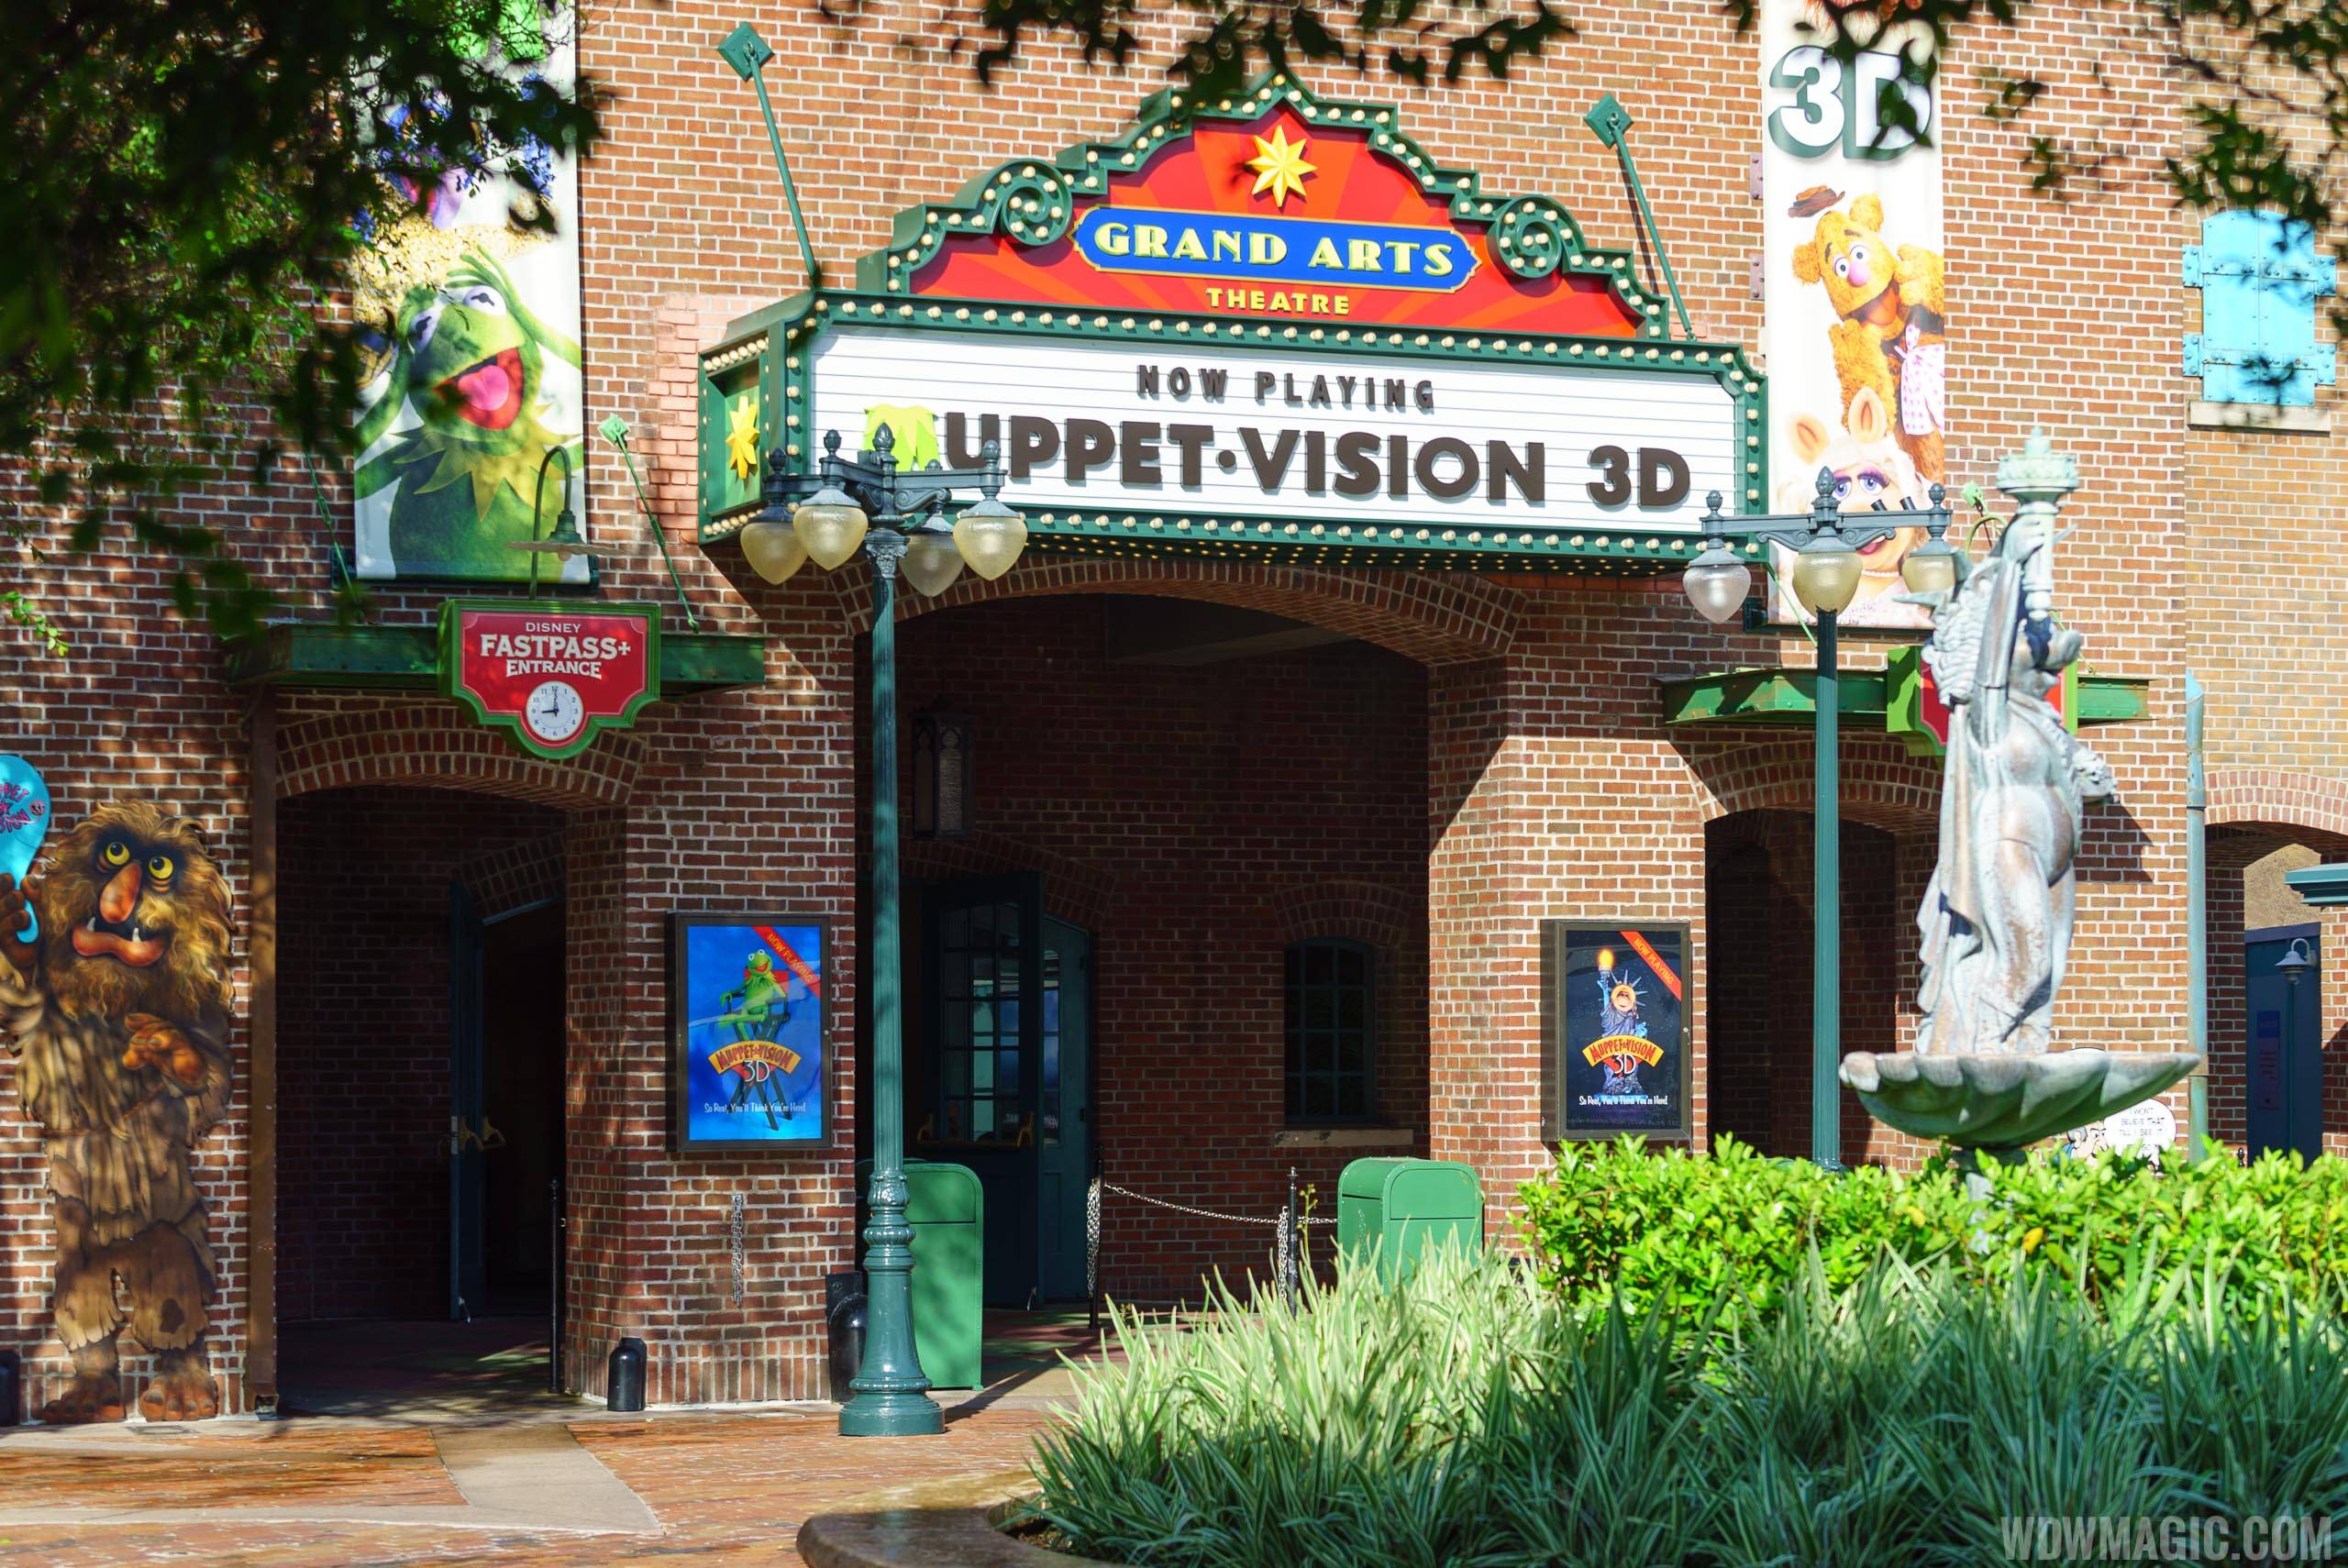 MuppetVision 3D closing for refurbishment later this month